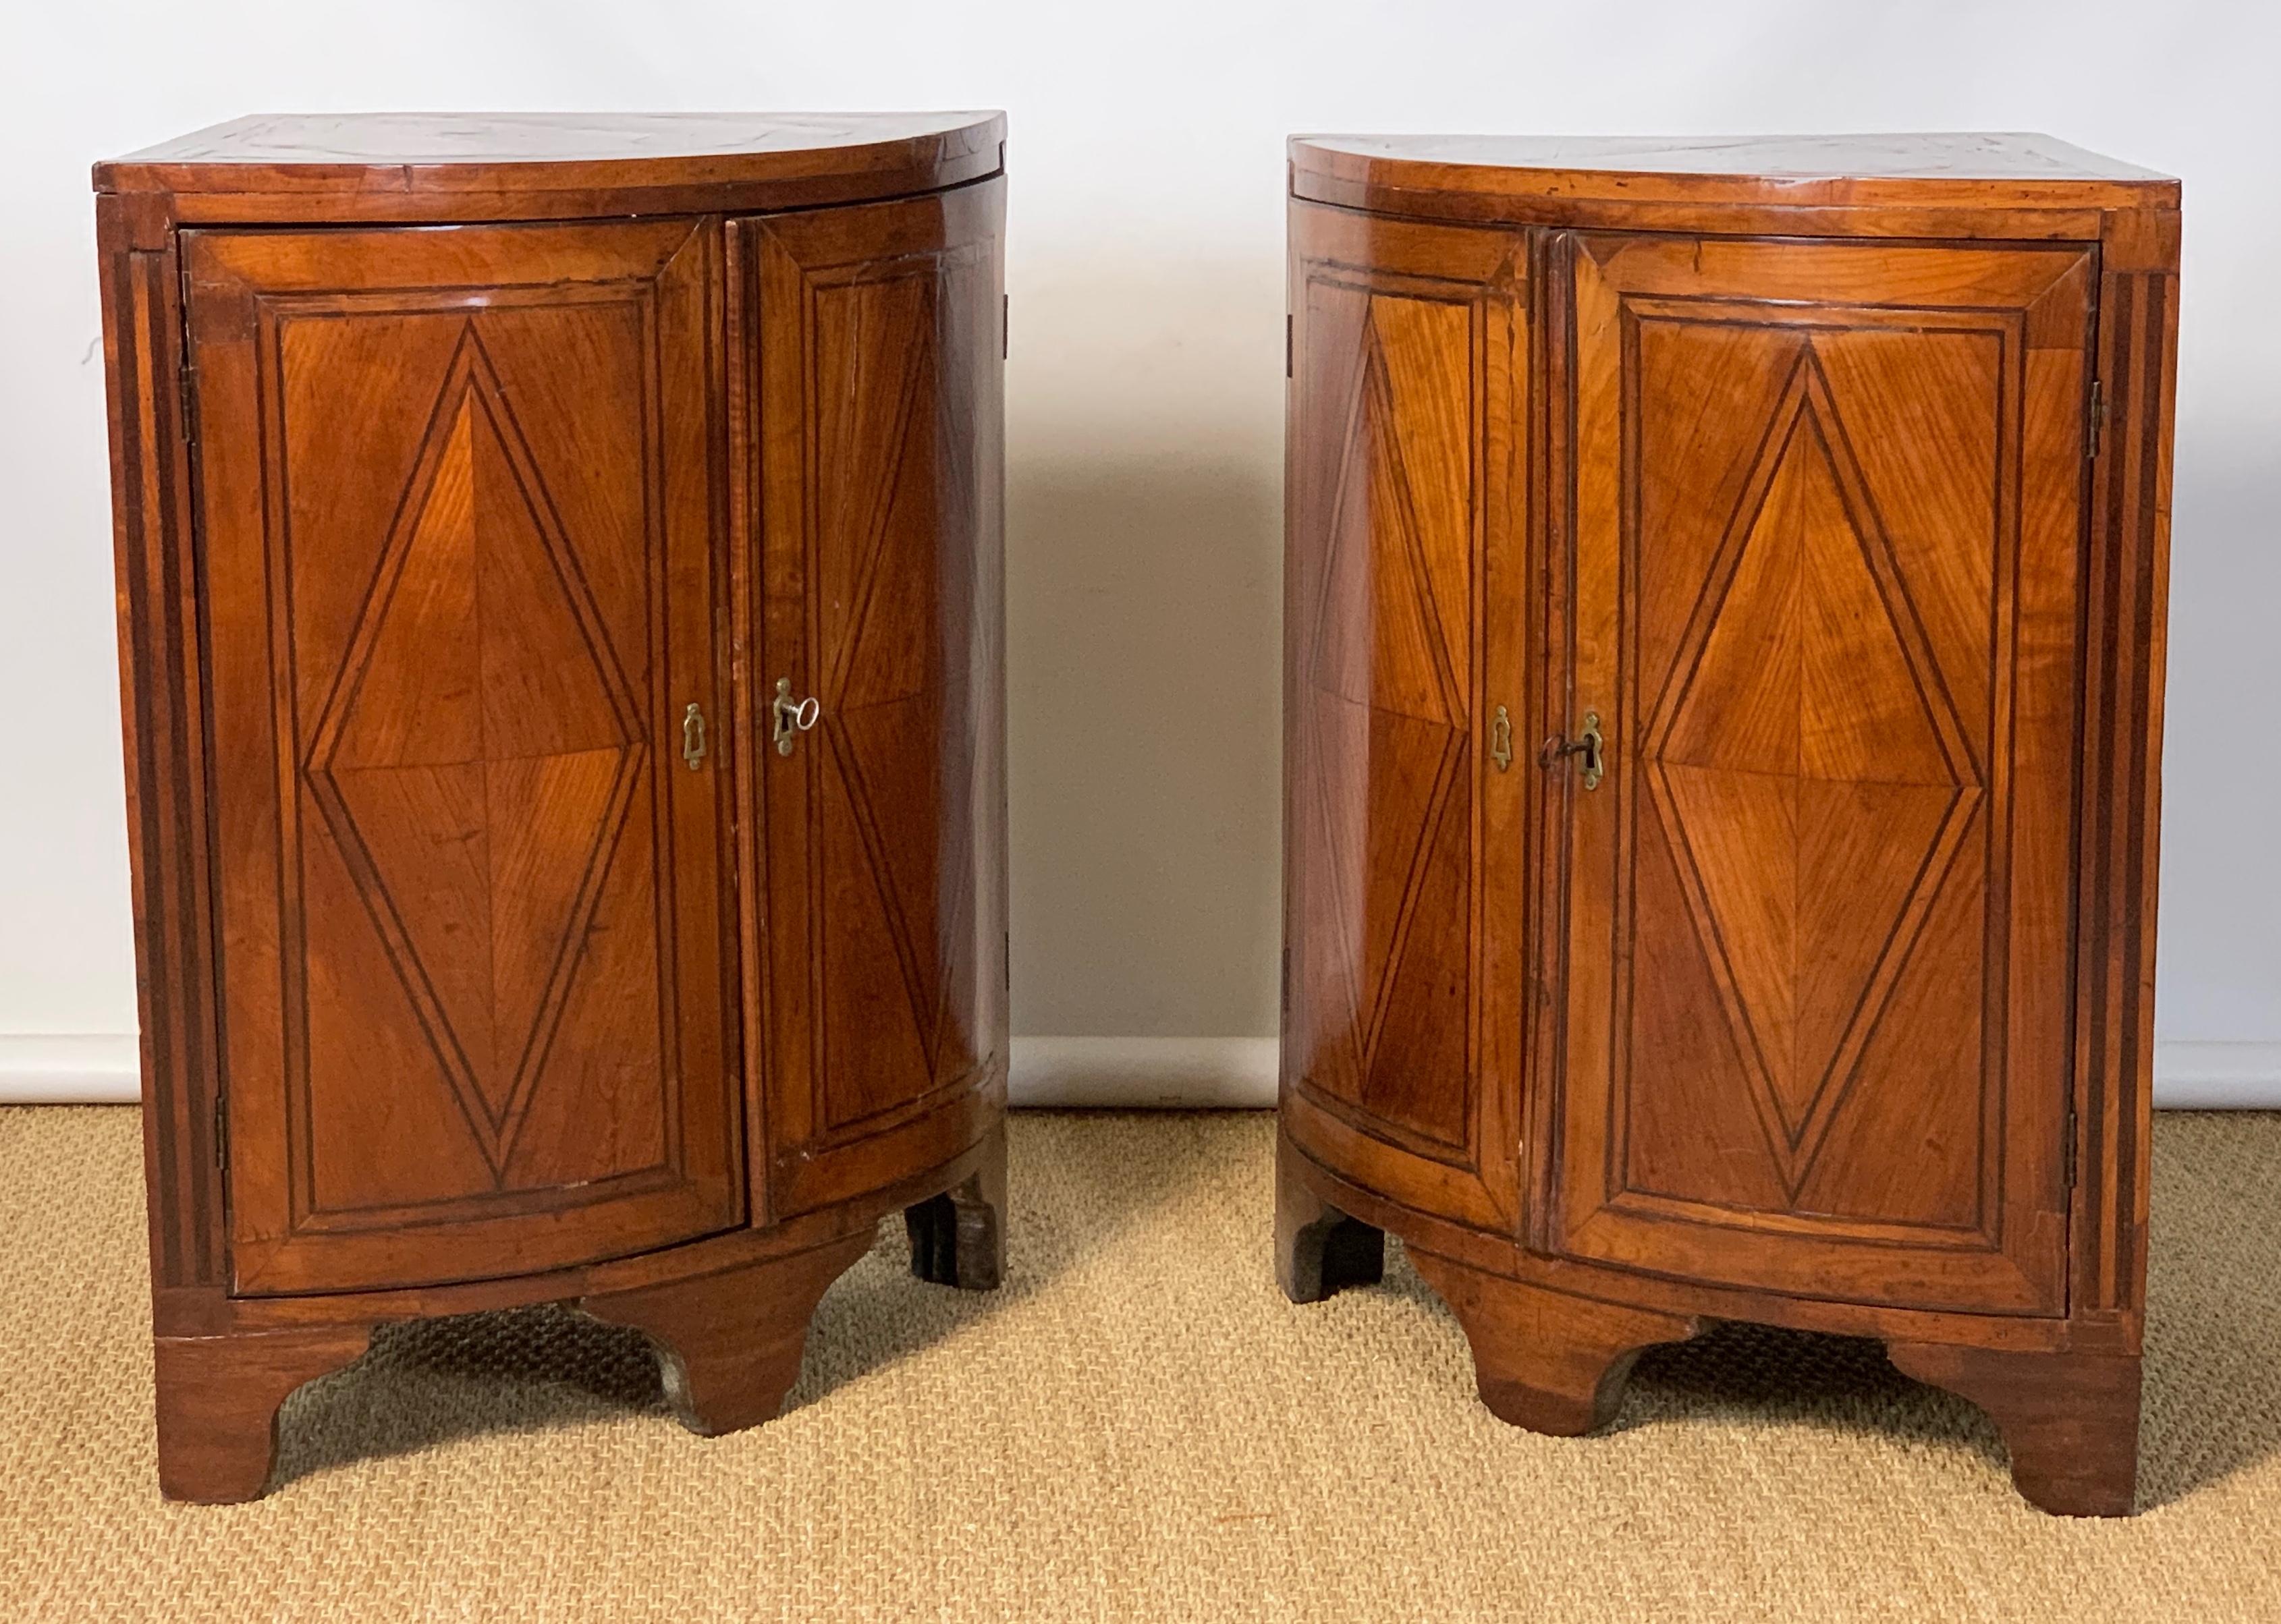 Louis XVI Pair of Late 18th Century French Encoigneurs 'Corner Cabinets'